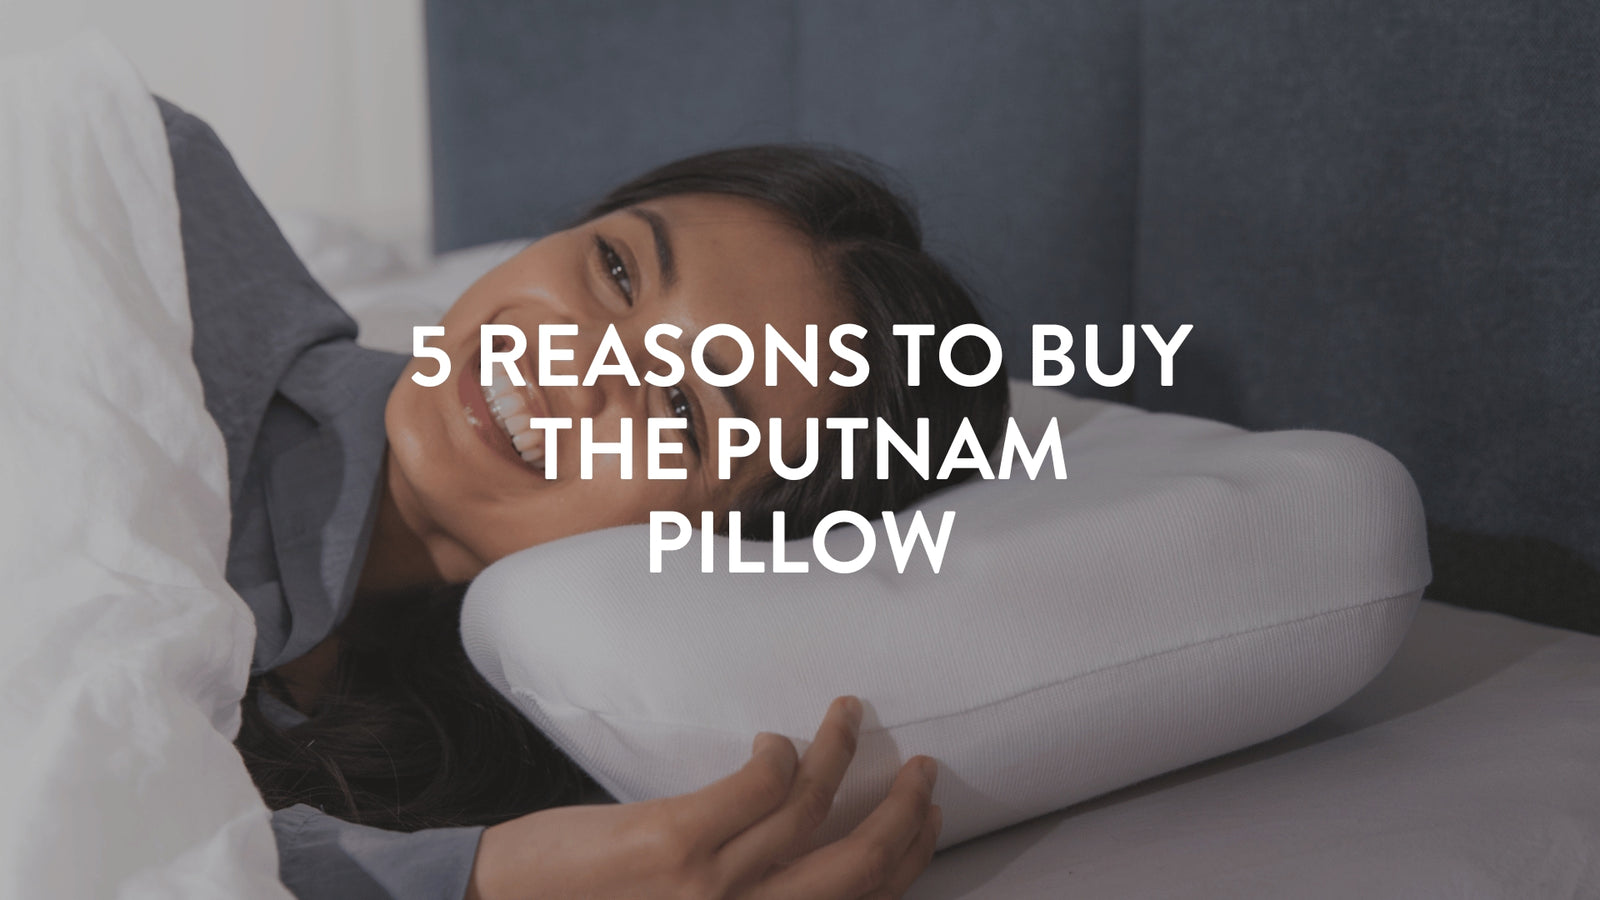 5 Reasons To Buy The Putnam Pillow